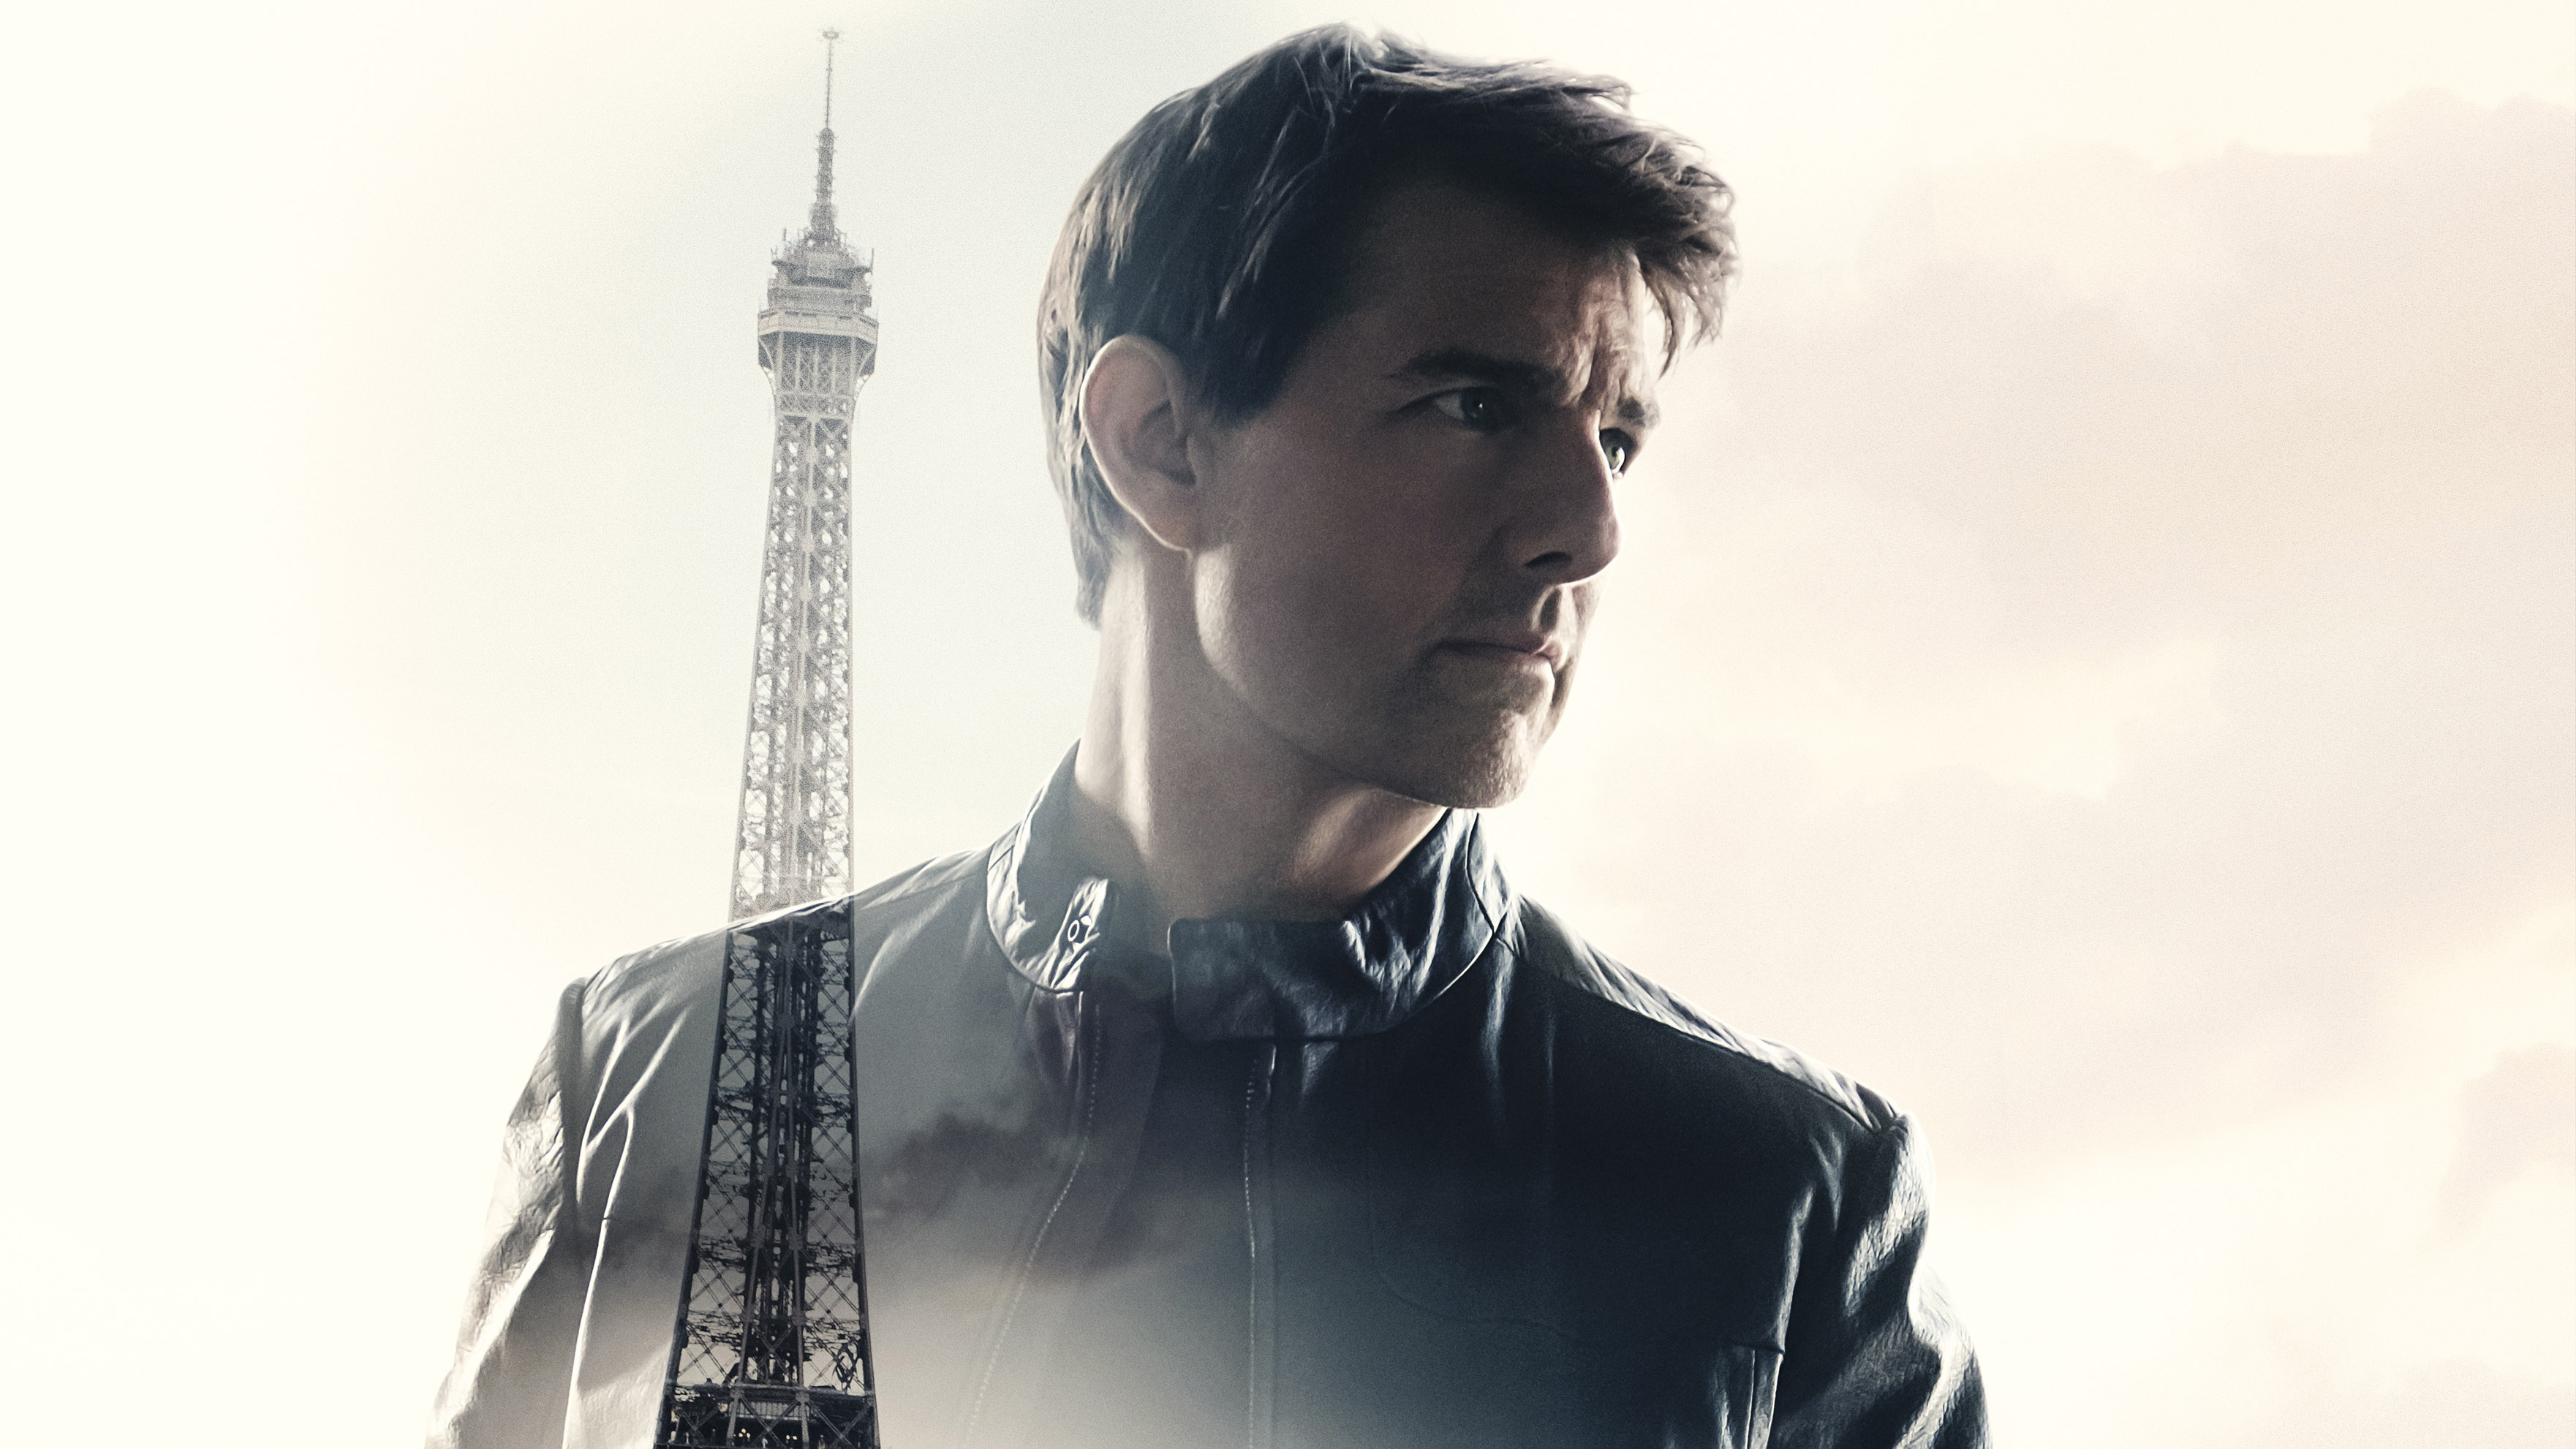 Tom Cruise Mission Impossible, 4K HD wallpapers, Action movies, Impressive visuals, 3530x1990 HD Desktop